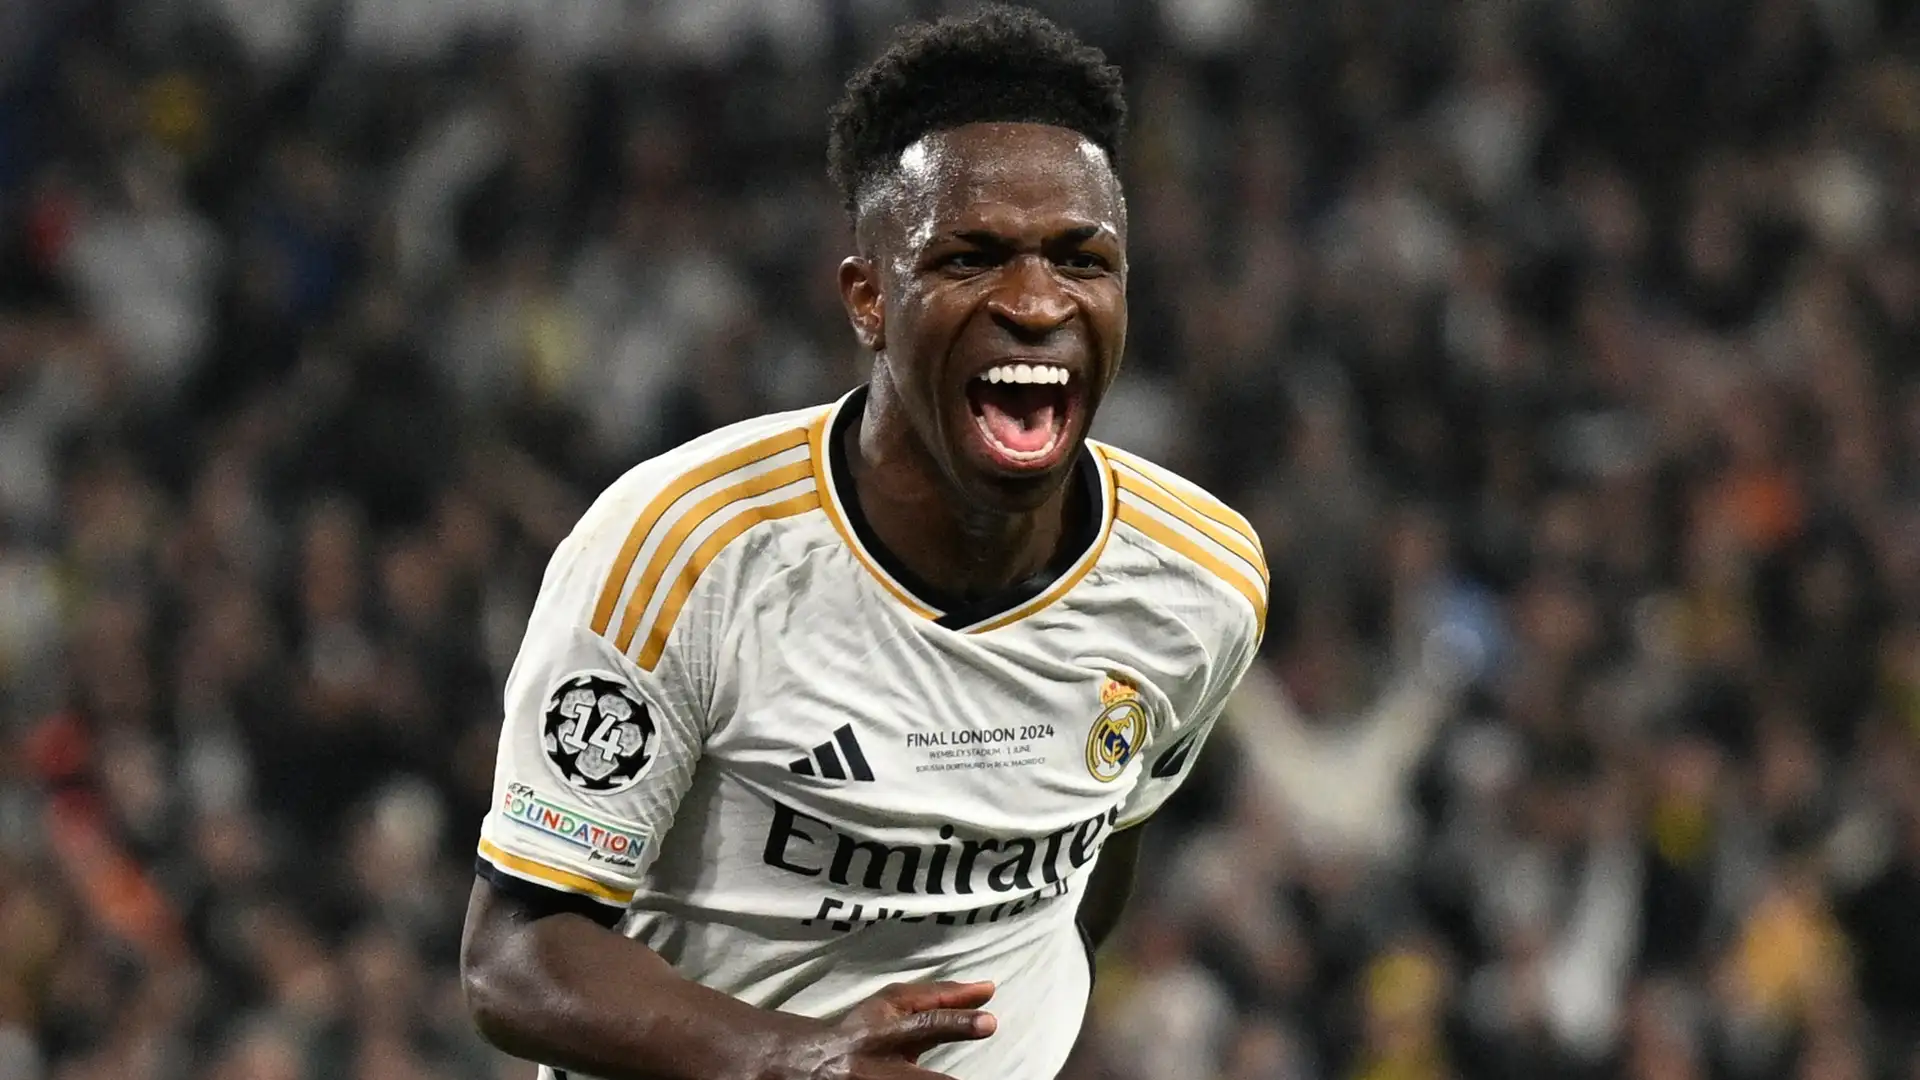 'I scolded him a little!' - Carlo Ancelotti reveals how he fired up Vinicius Junior to inspire Real Madrid star to score in Champions League final victory against Borussia Dortmund